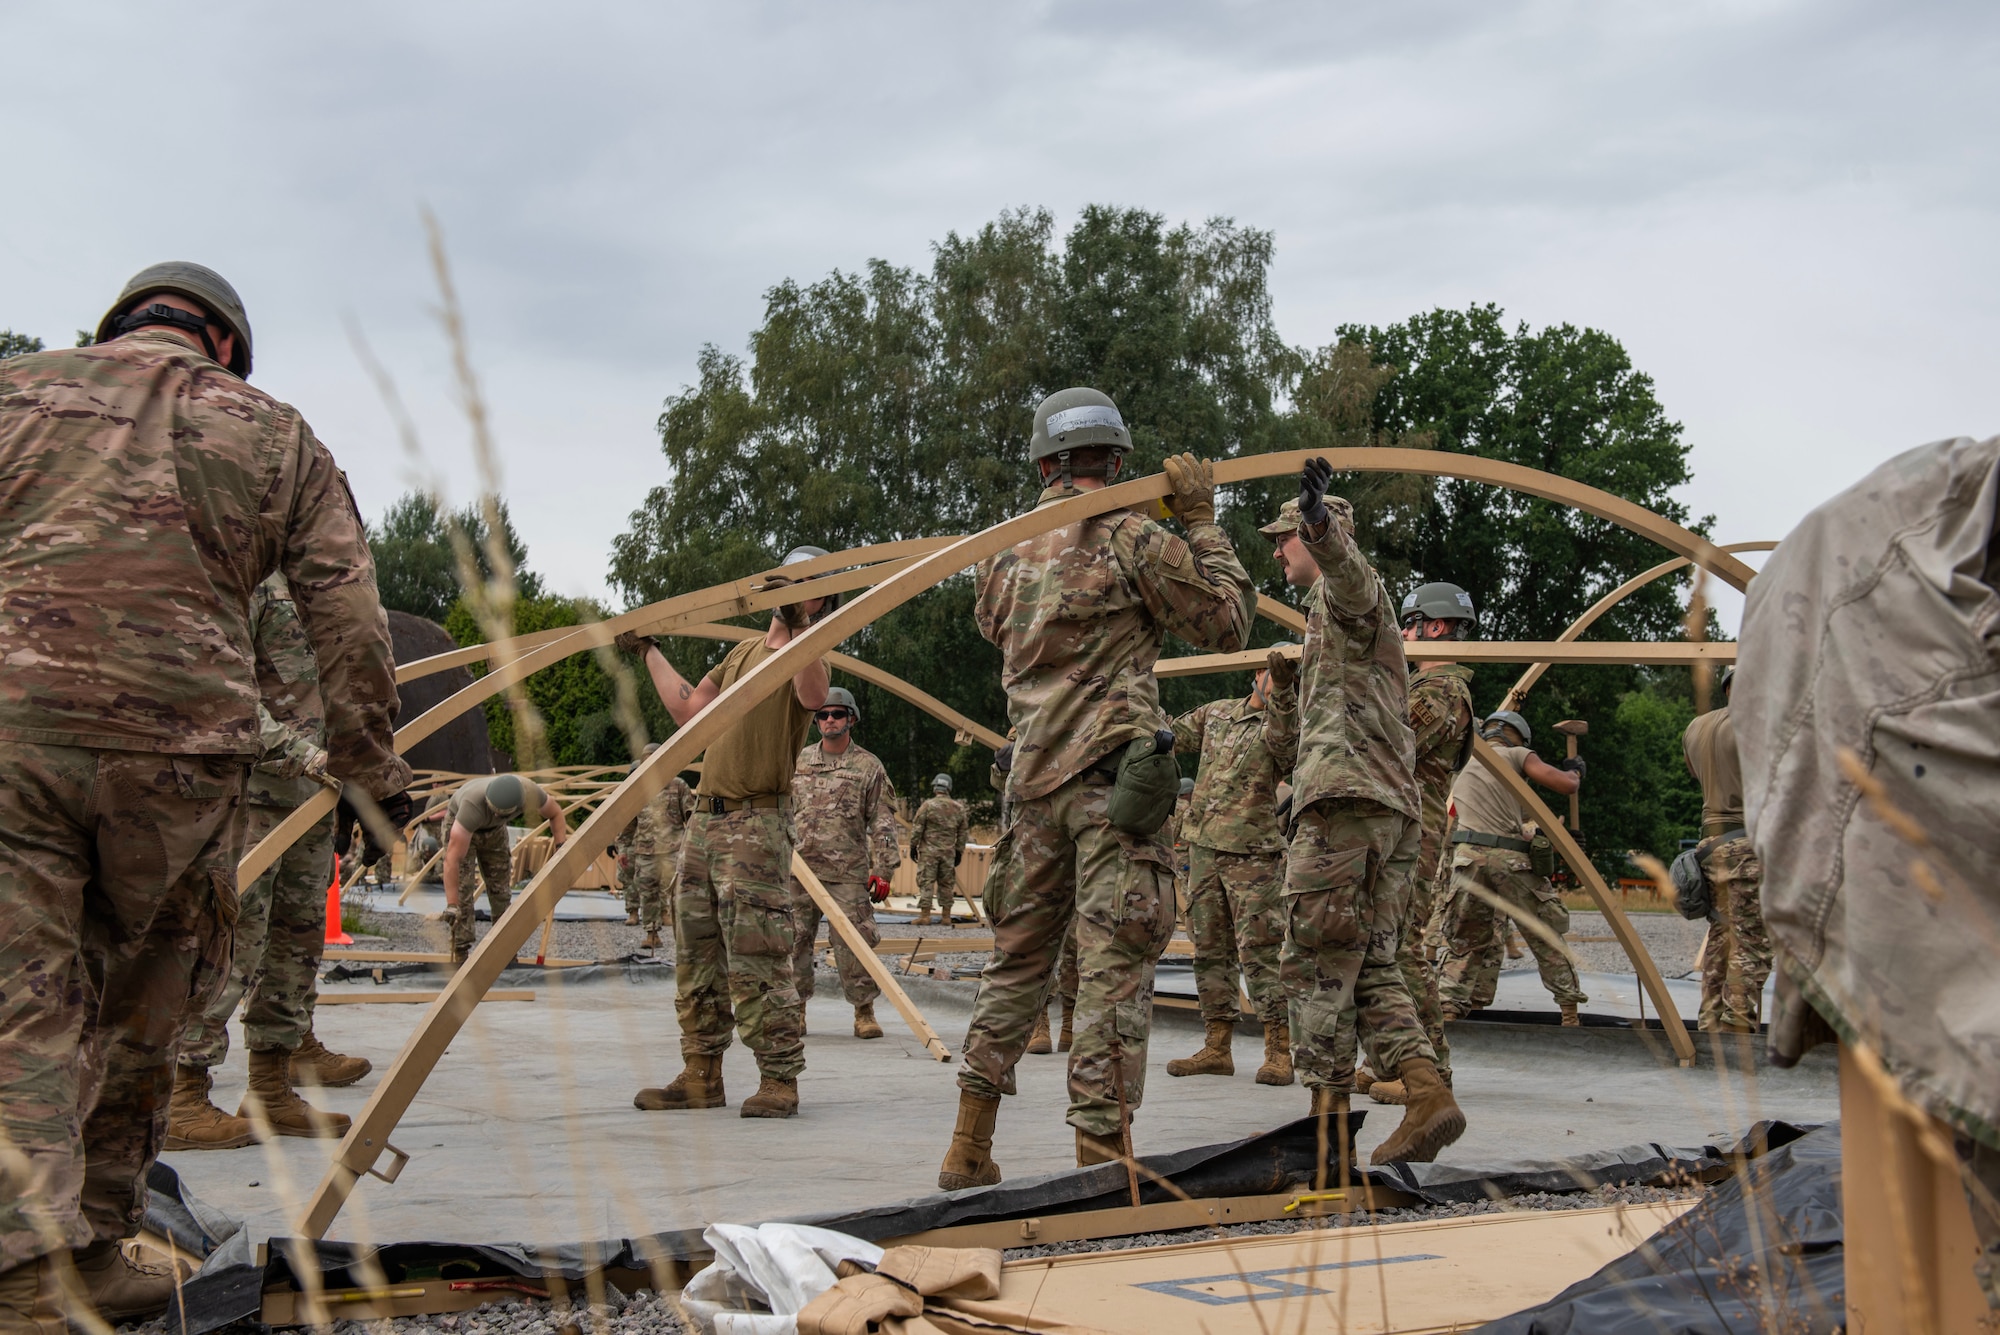 Multiple Airmen work together to set up a tent